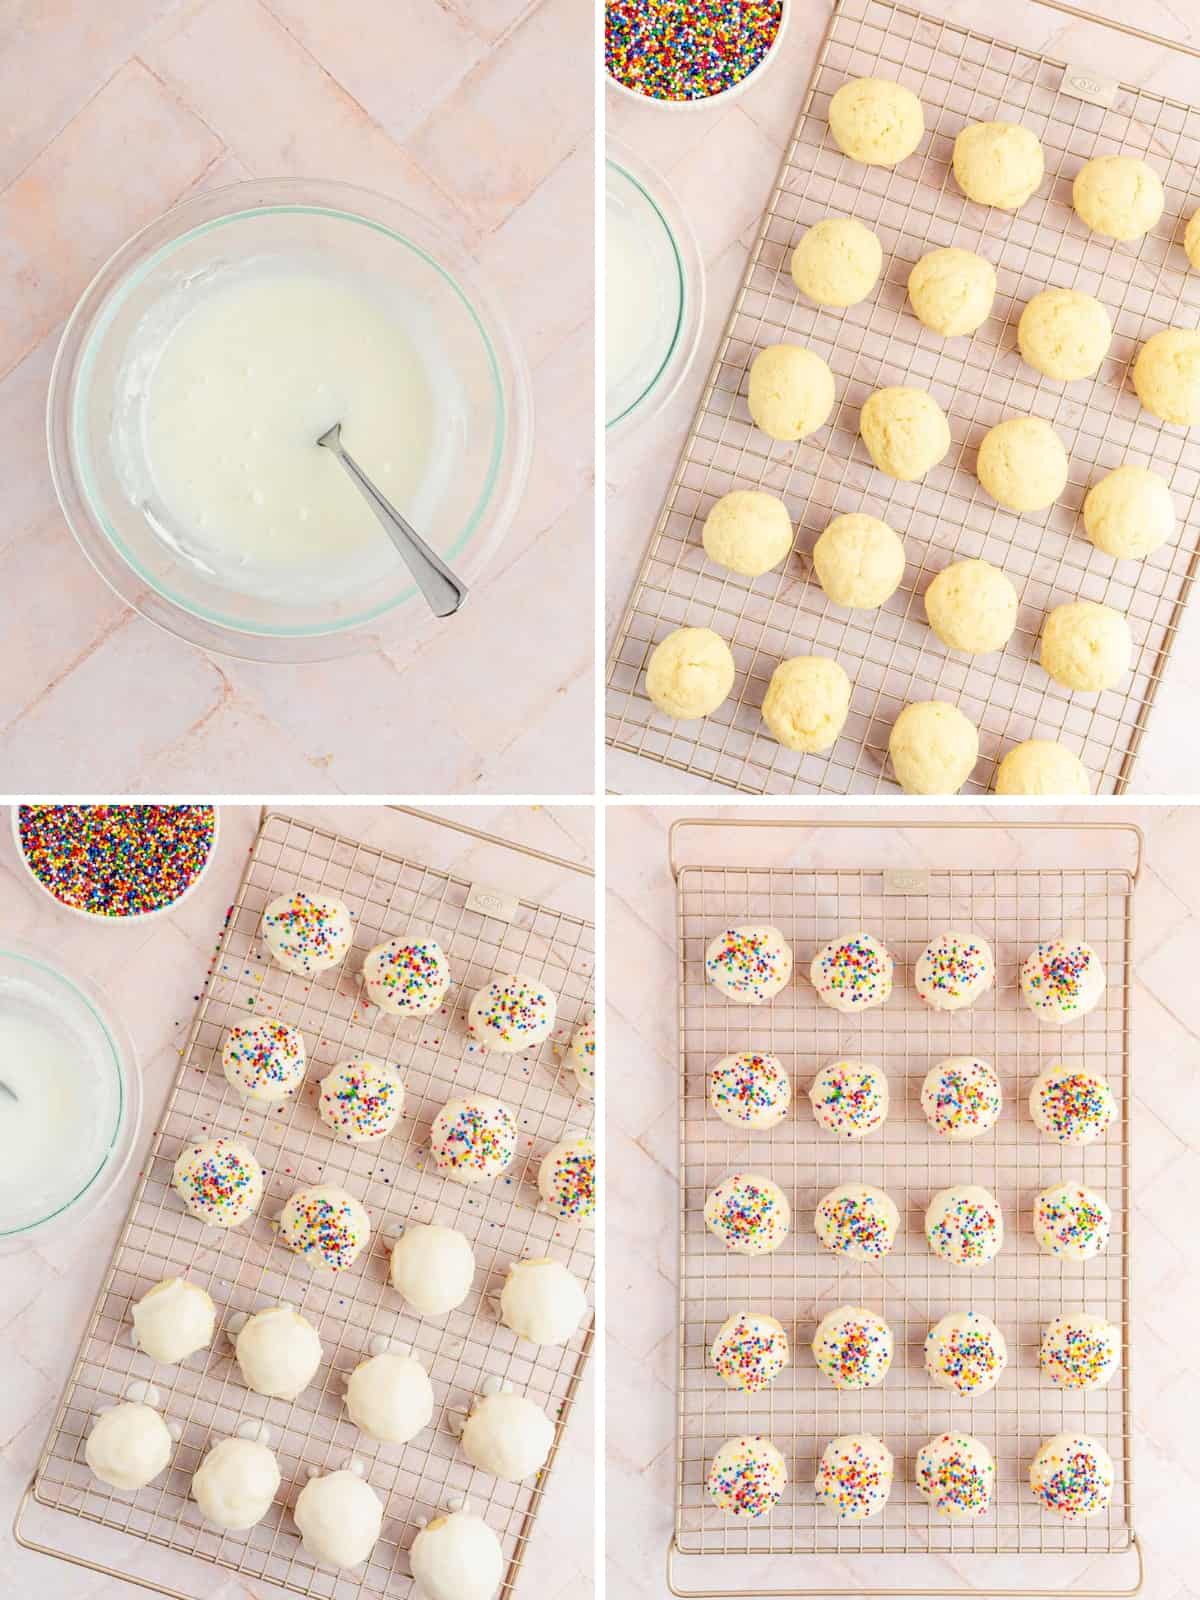 Collage images showing steps to glaze and decorate with sprinkles.